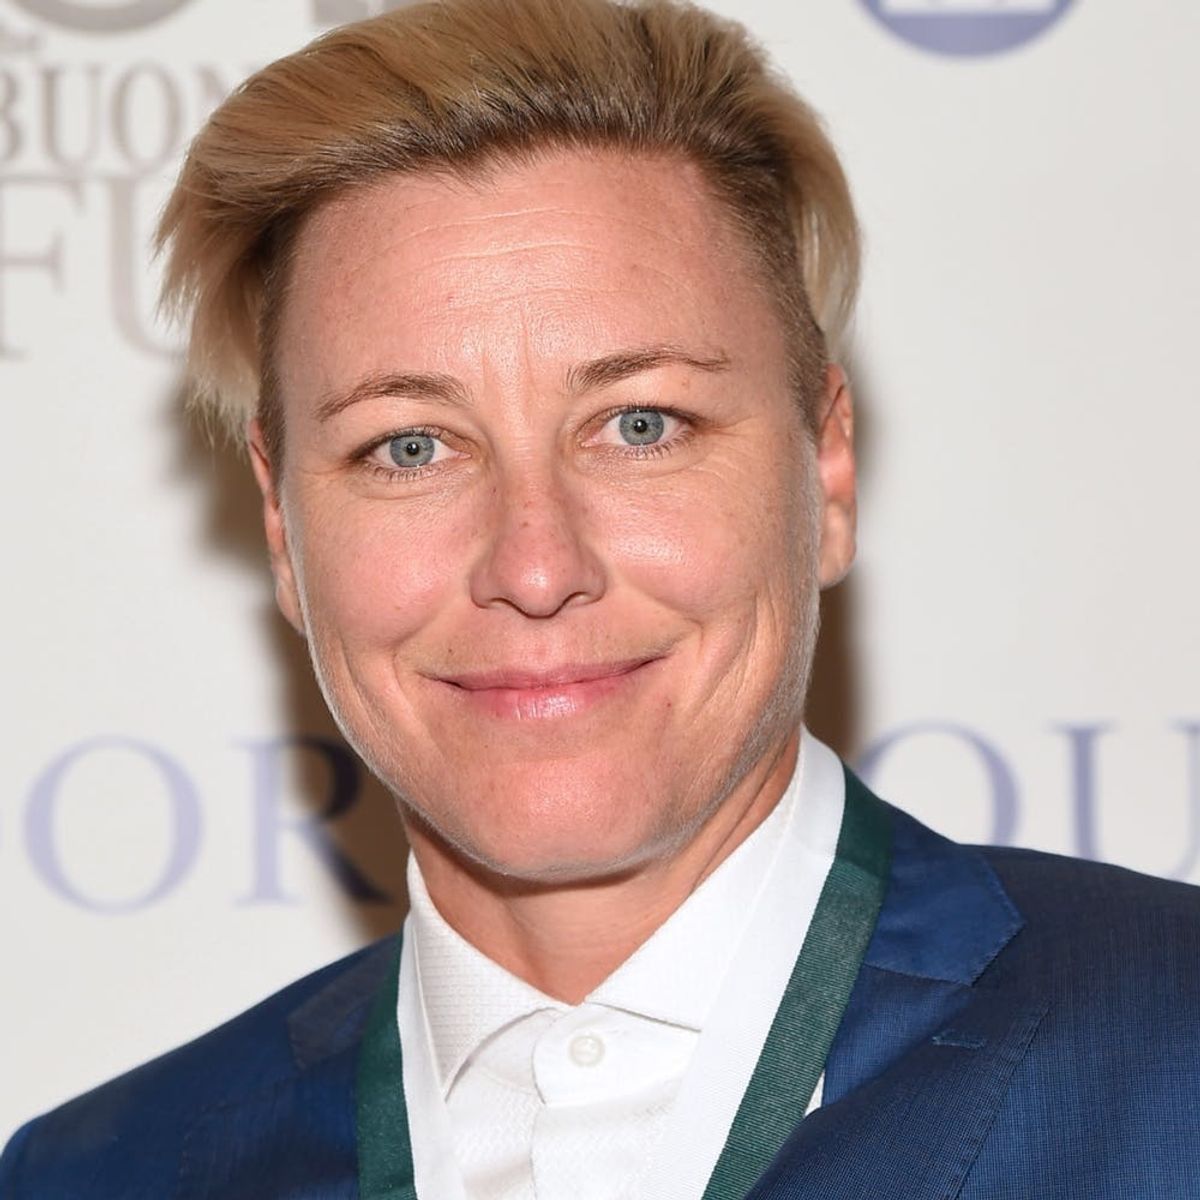 Soccer Champ Abby Wambach’s Barnard Commencement Speech Is Going Viral for All the Right Reasons